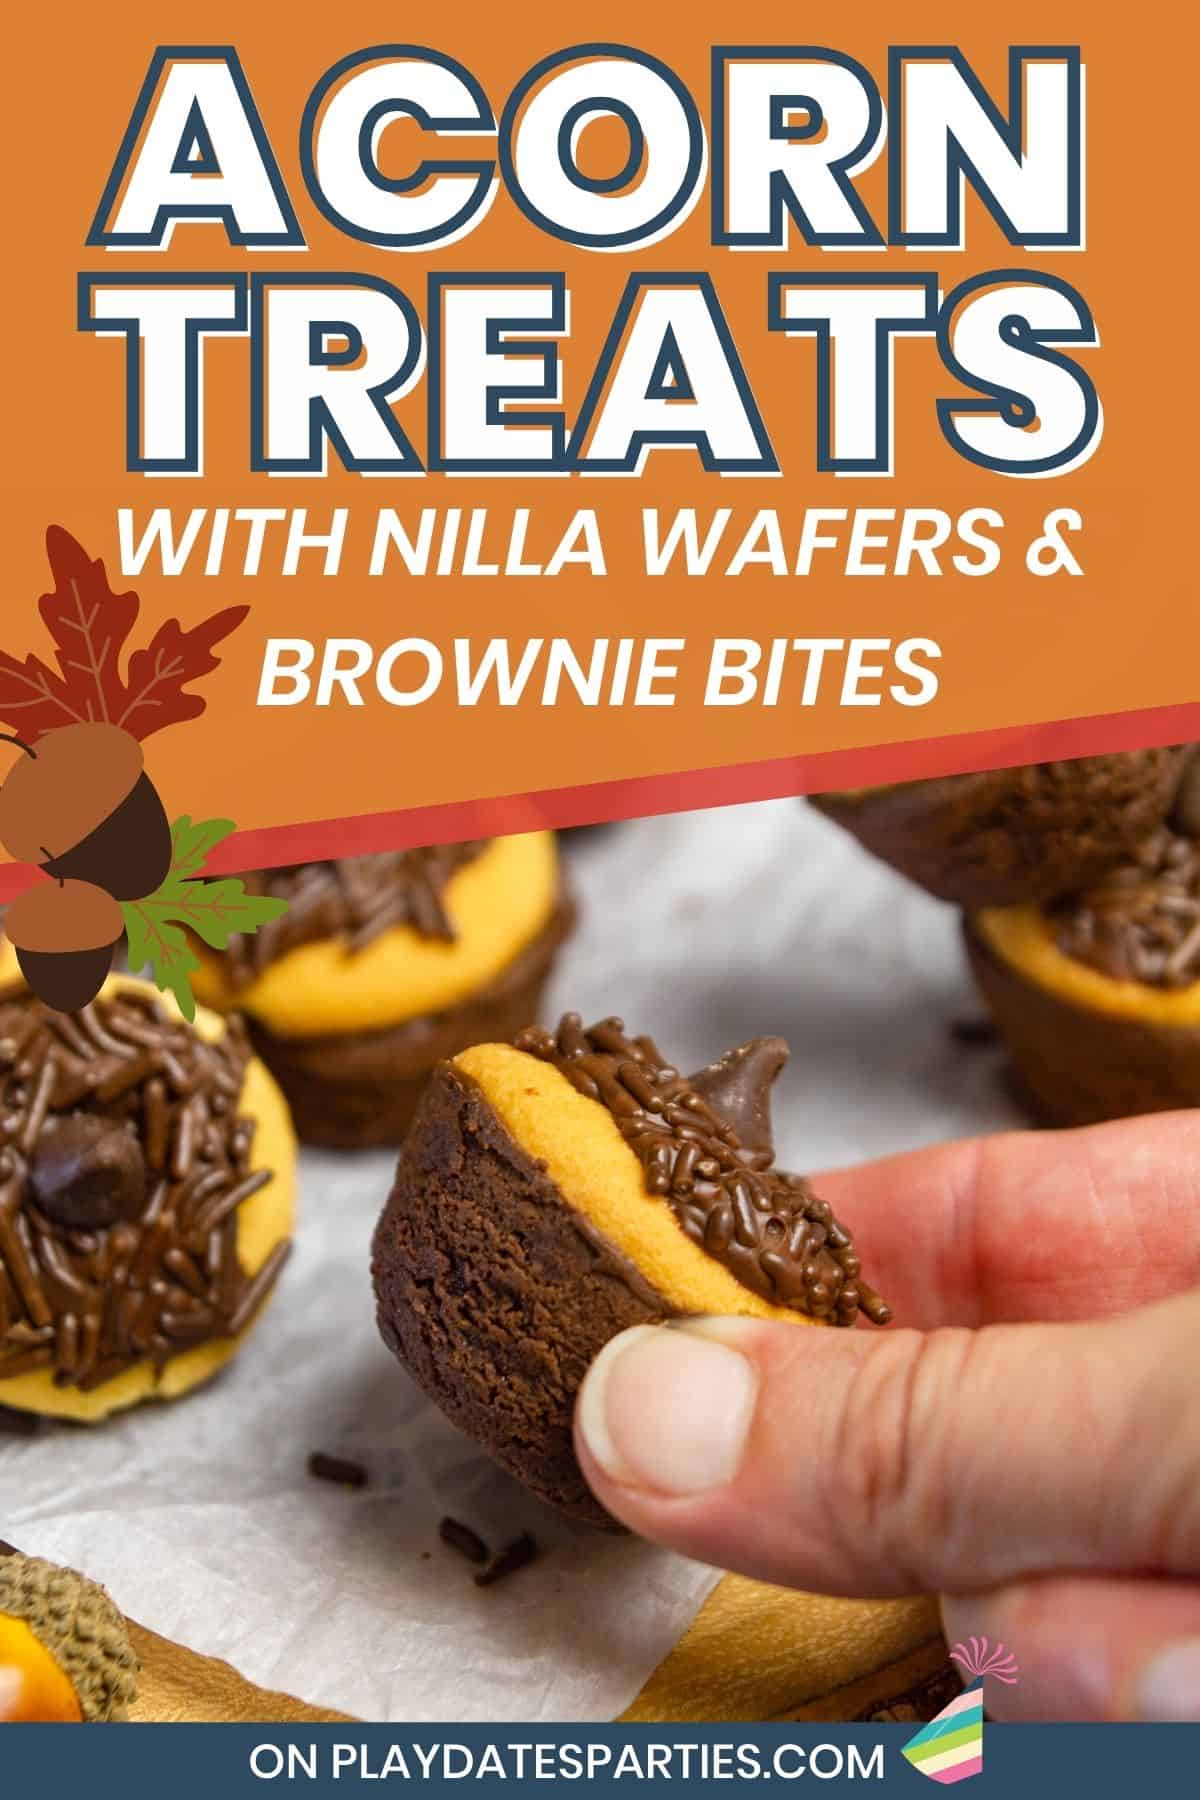 Close up of a woman's hand holding a fall treat with text overlay: acorn treats with nilla wafers and brownie bites.